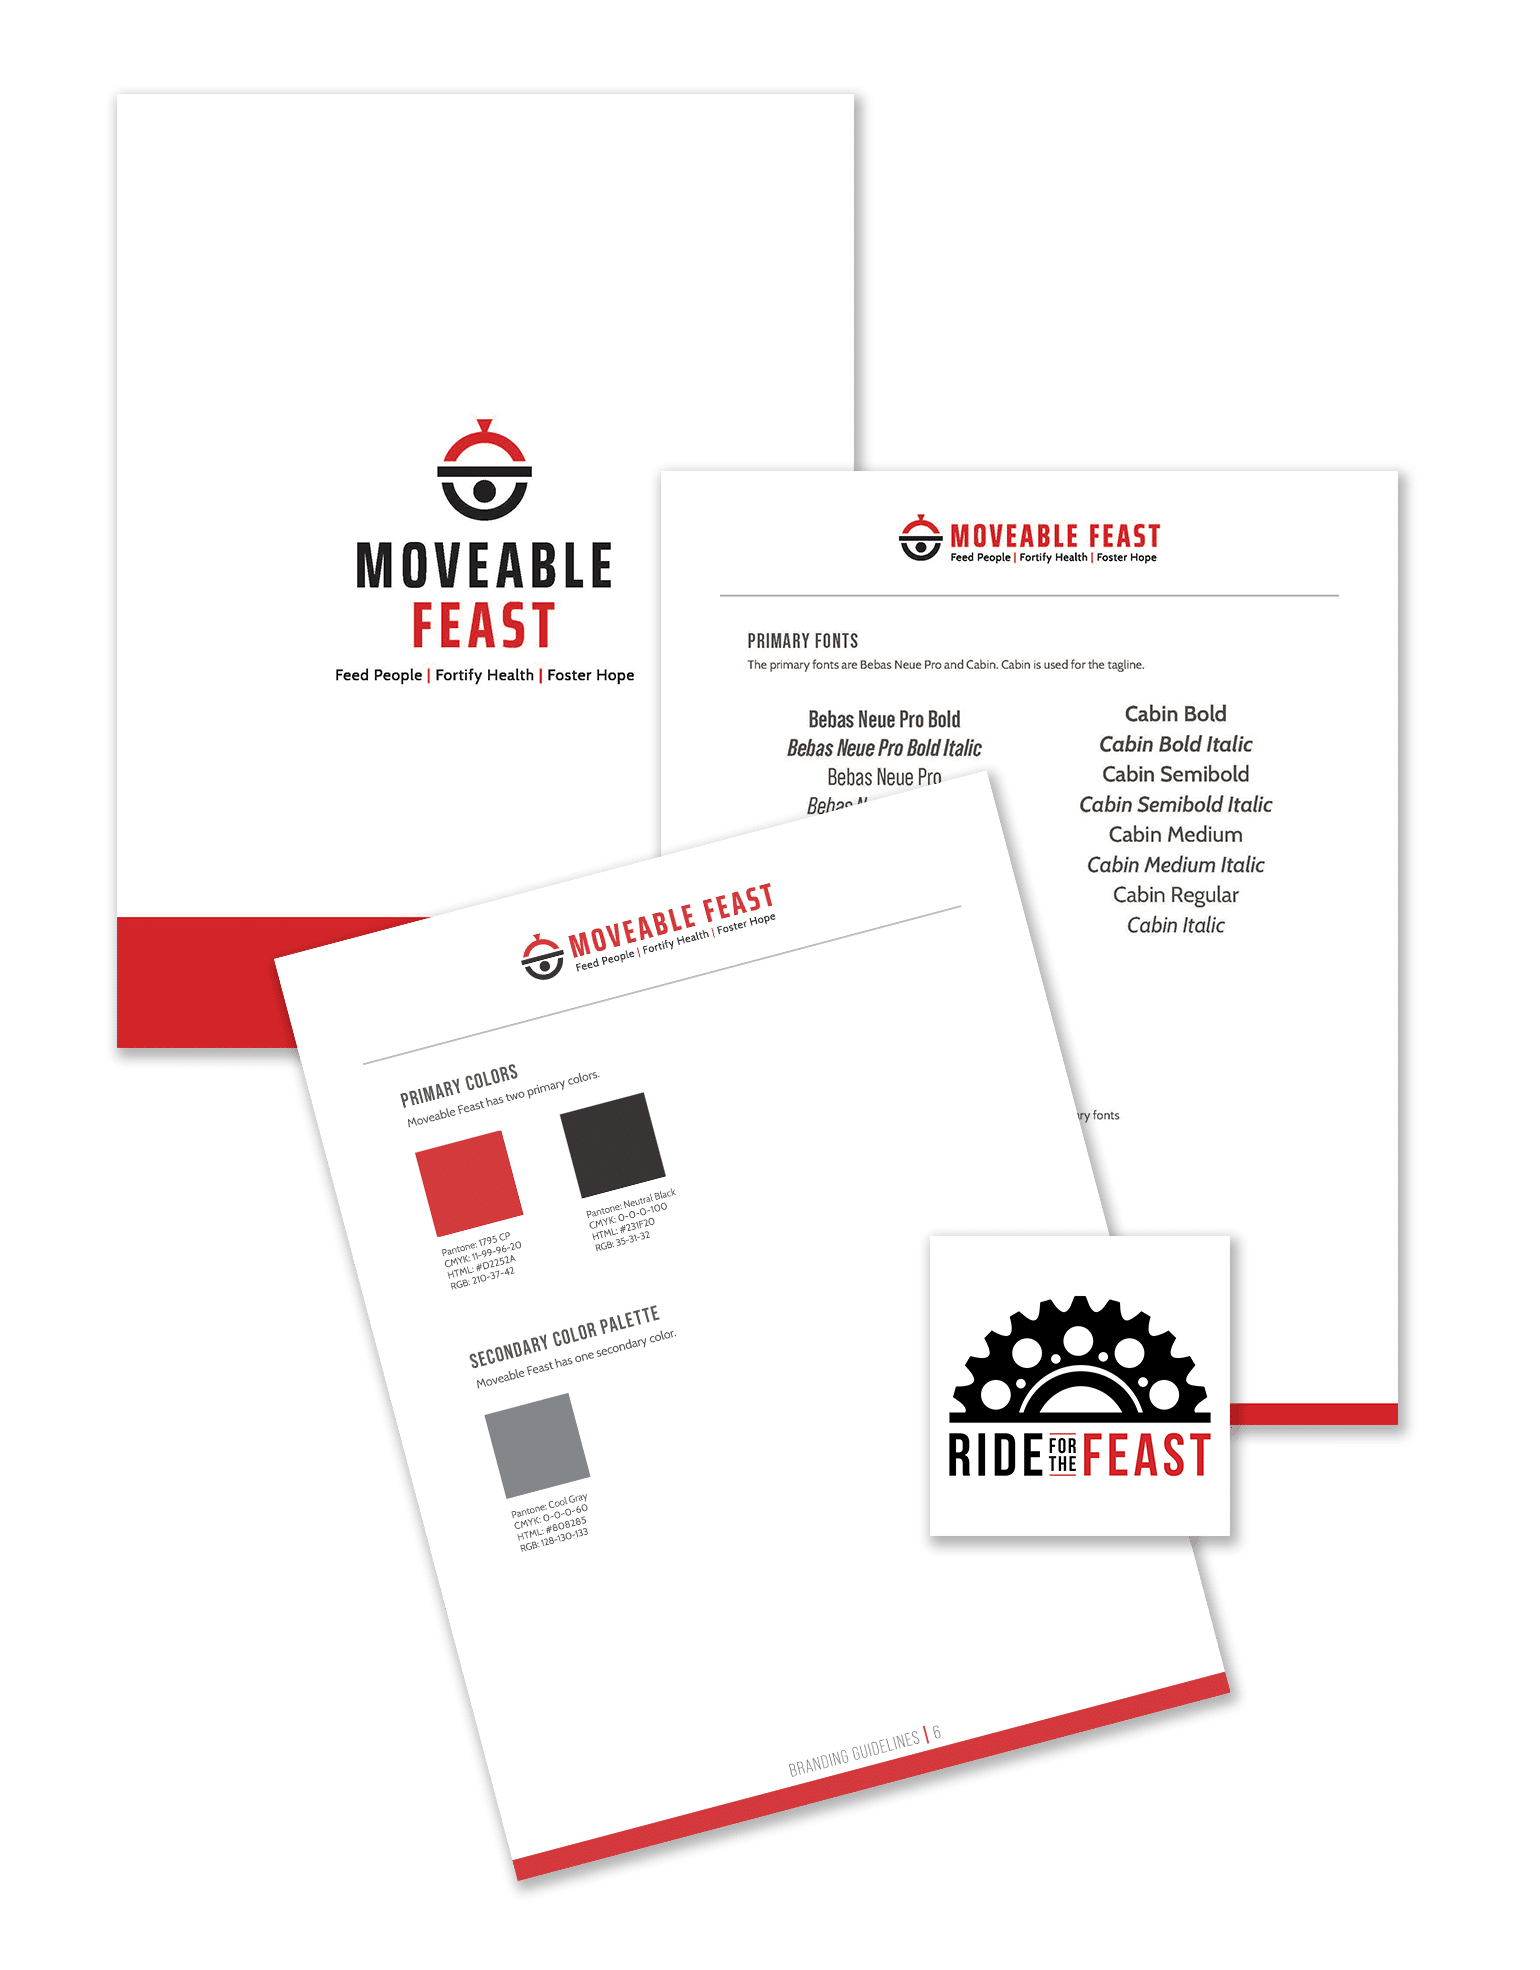 Mfeast brand guidelines new